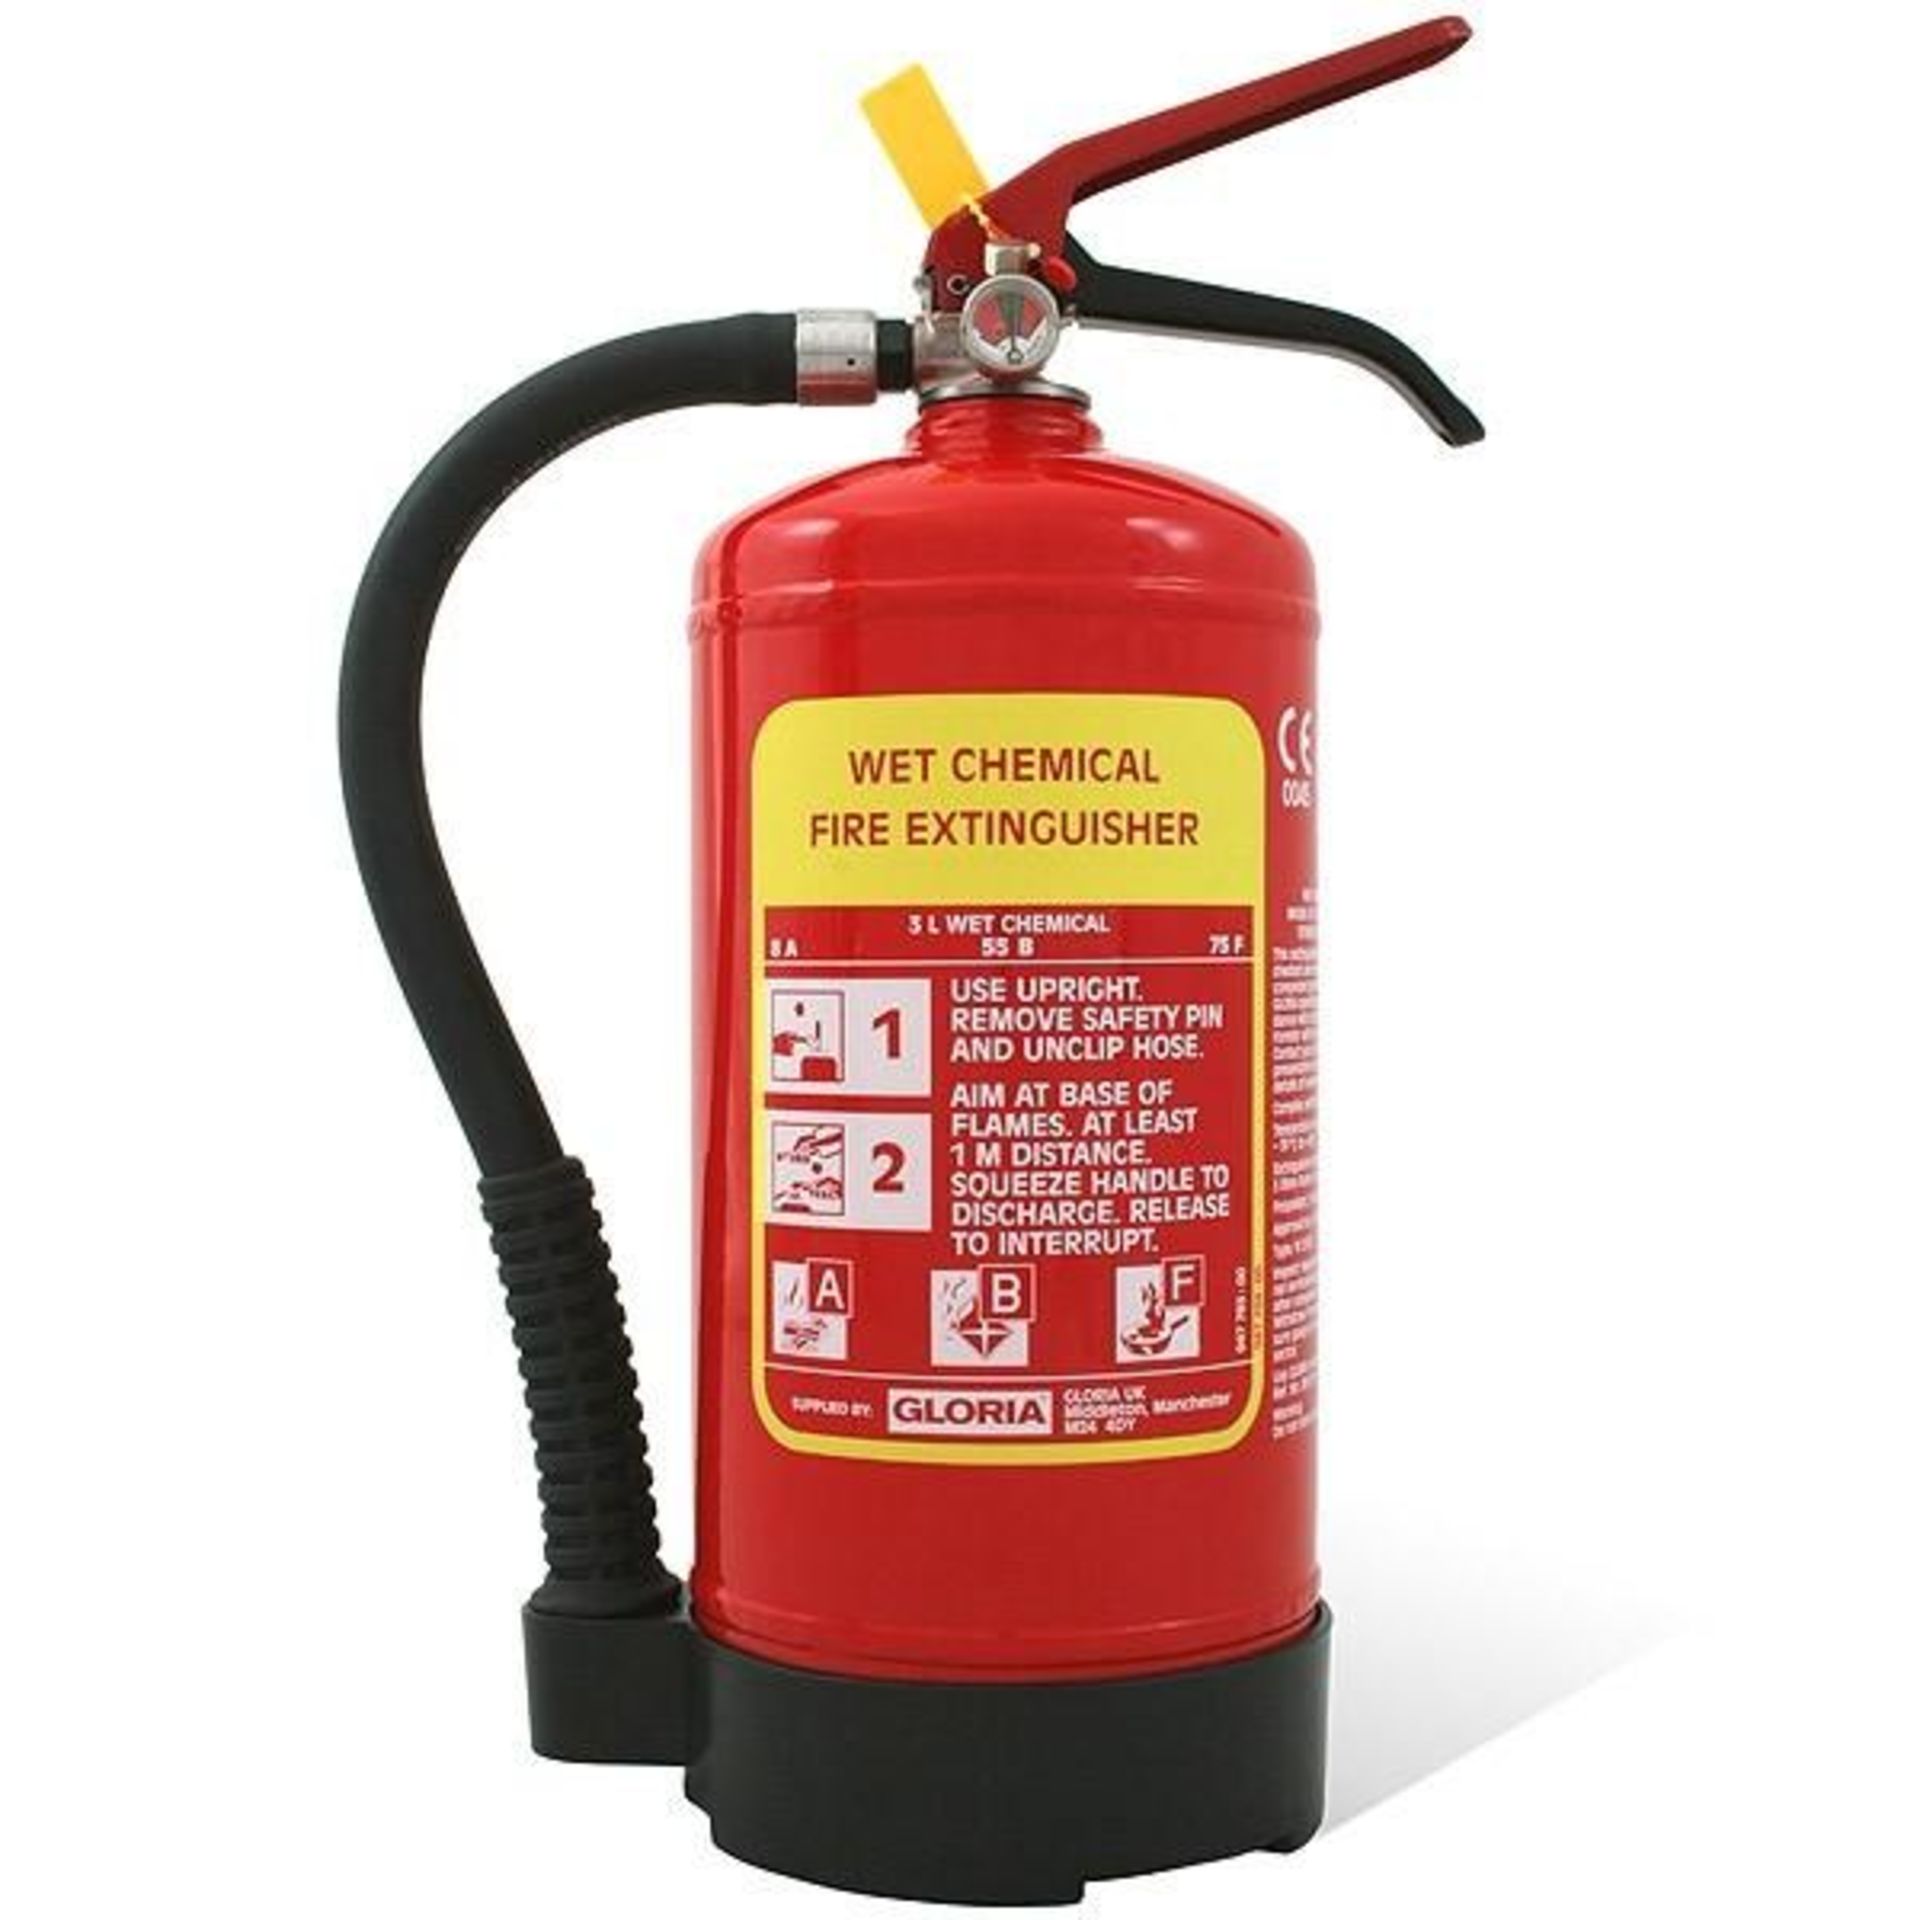 4 x 3 Litre Wet Chemical Fire Extinguishers (Fclass) - CL185 - Ref: 57010/P6 - New Stock - Location: